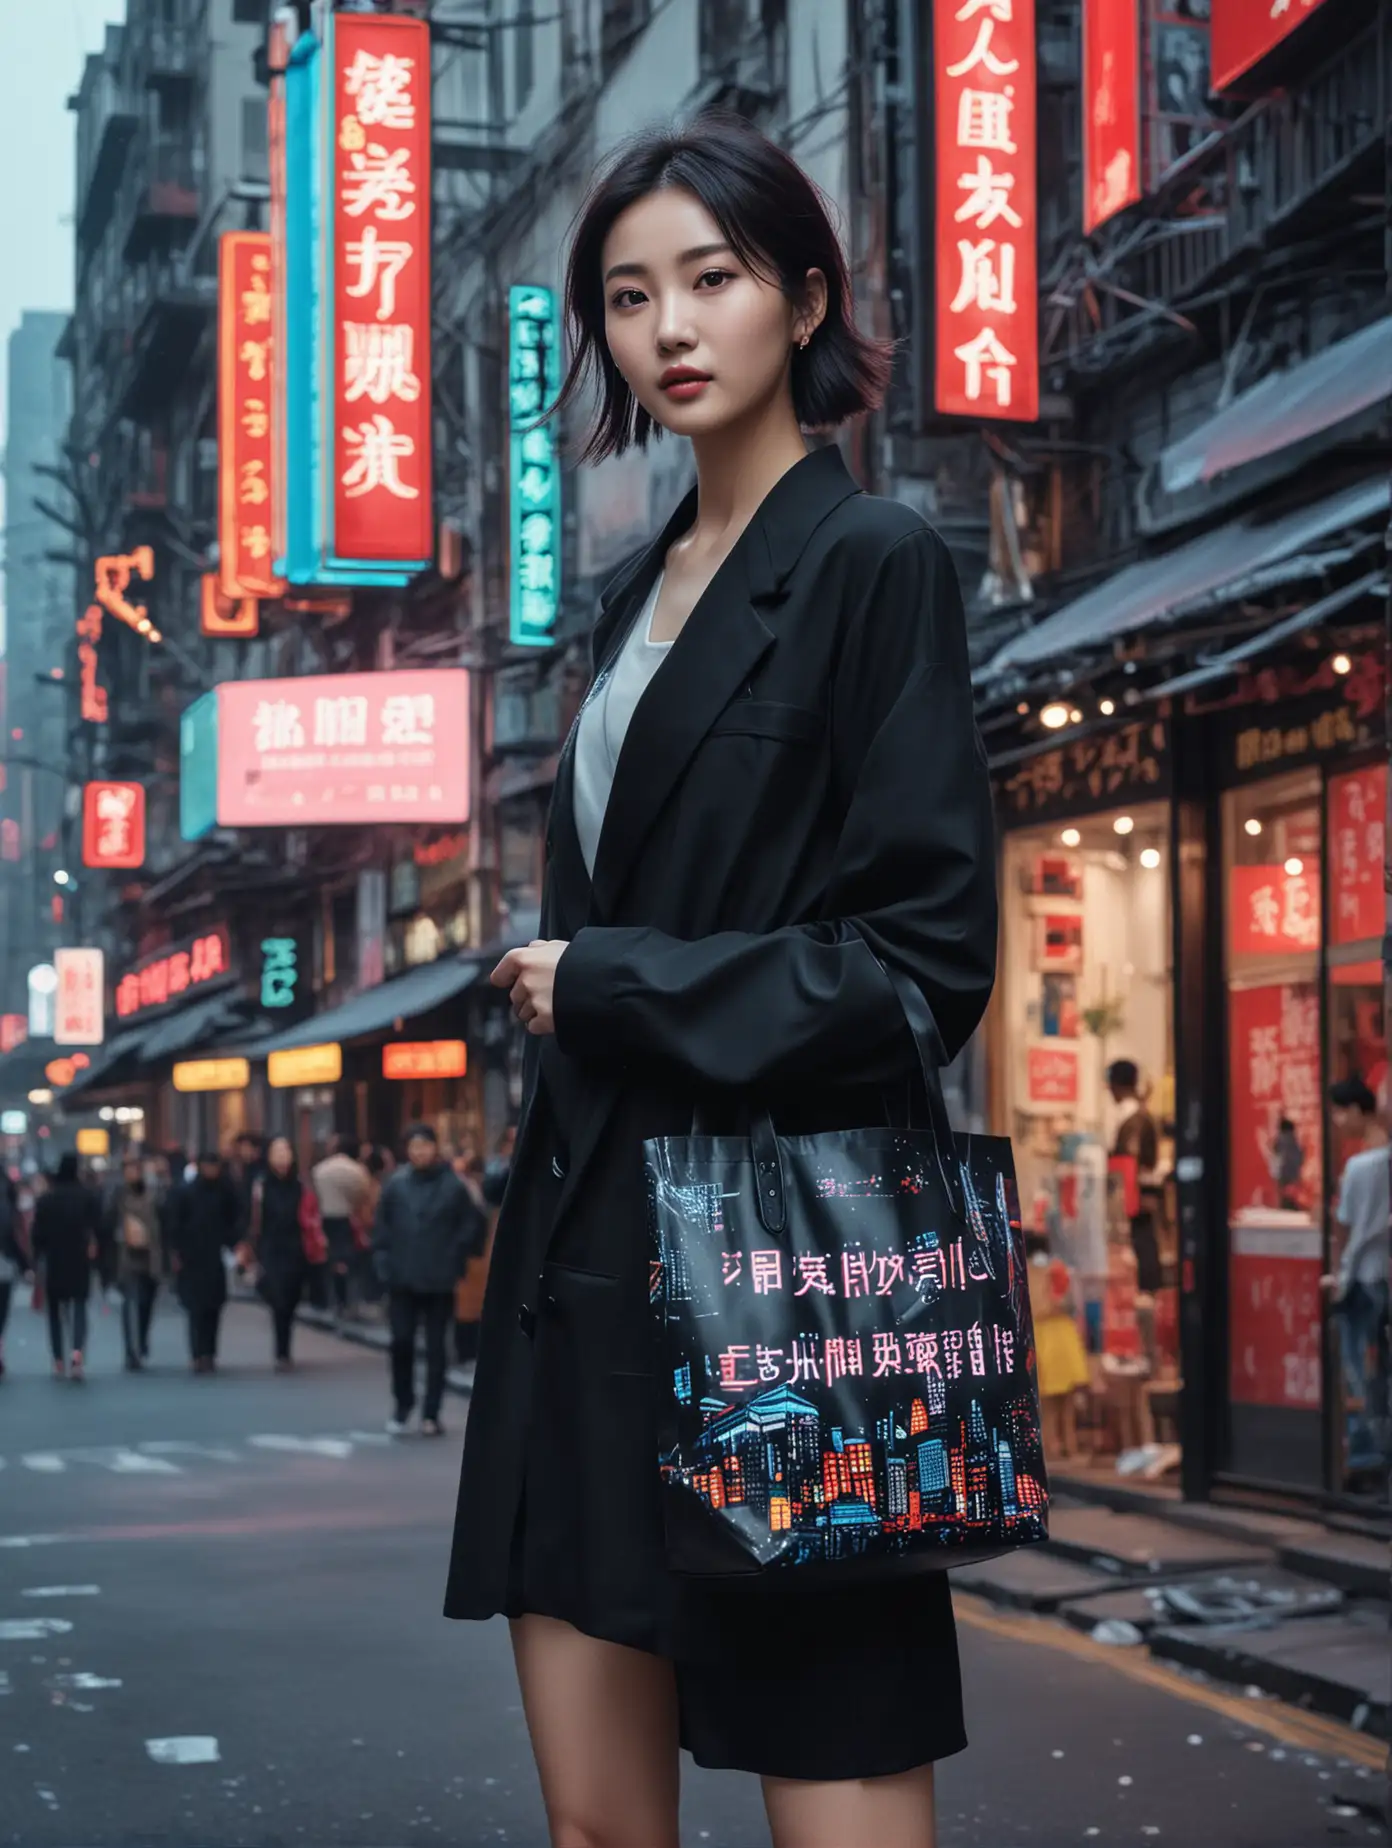 Modern Gao Yuanyuan, Shanghai  fashion, black shopper bag held with a sense of momentum, posing dynamically on a bustling Shanghai street, neon signs illuminating the background, soft focus on distant cityscape, vibrant colors, contrast between the sharp fashion details and blurred pedestrians, frozen motion, dramatic lighting, high-resolution digital painting.